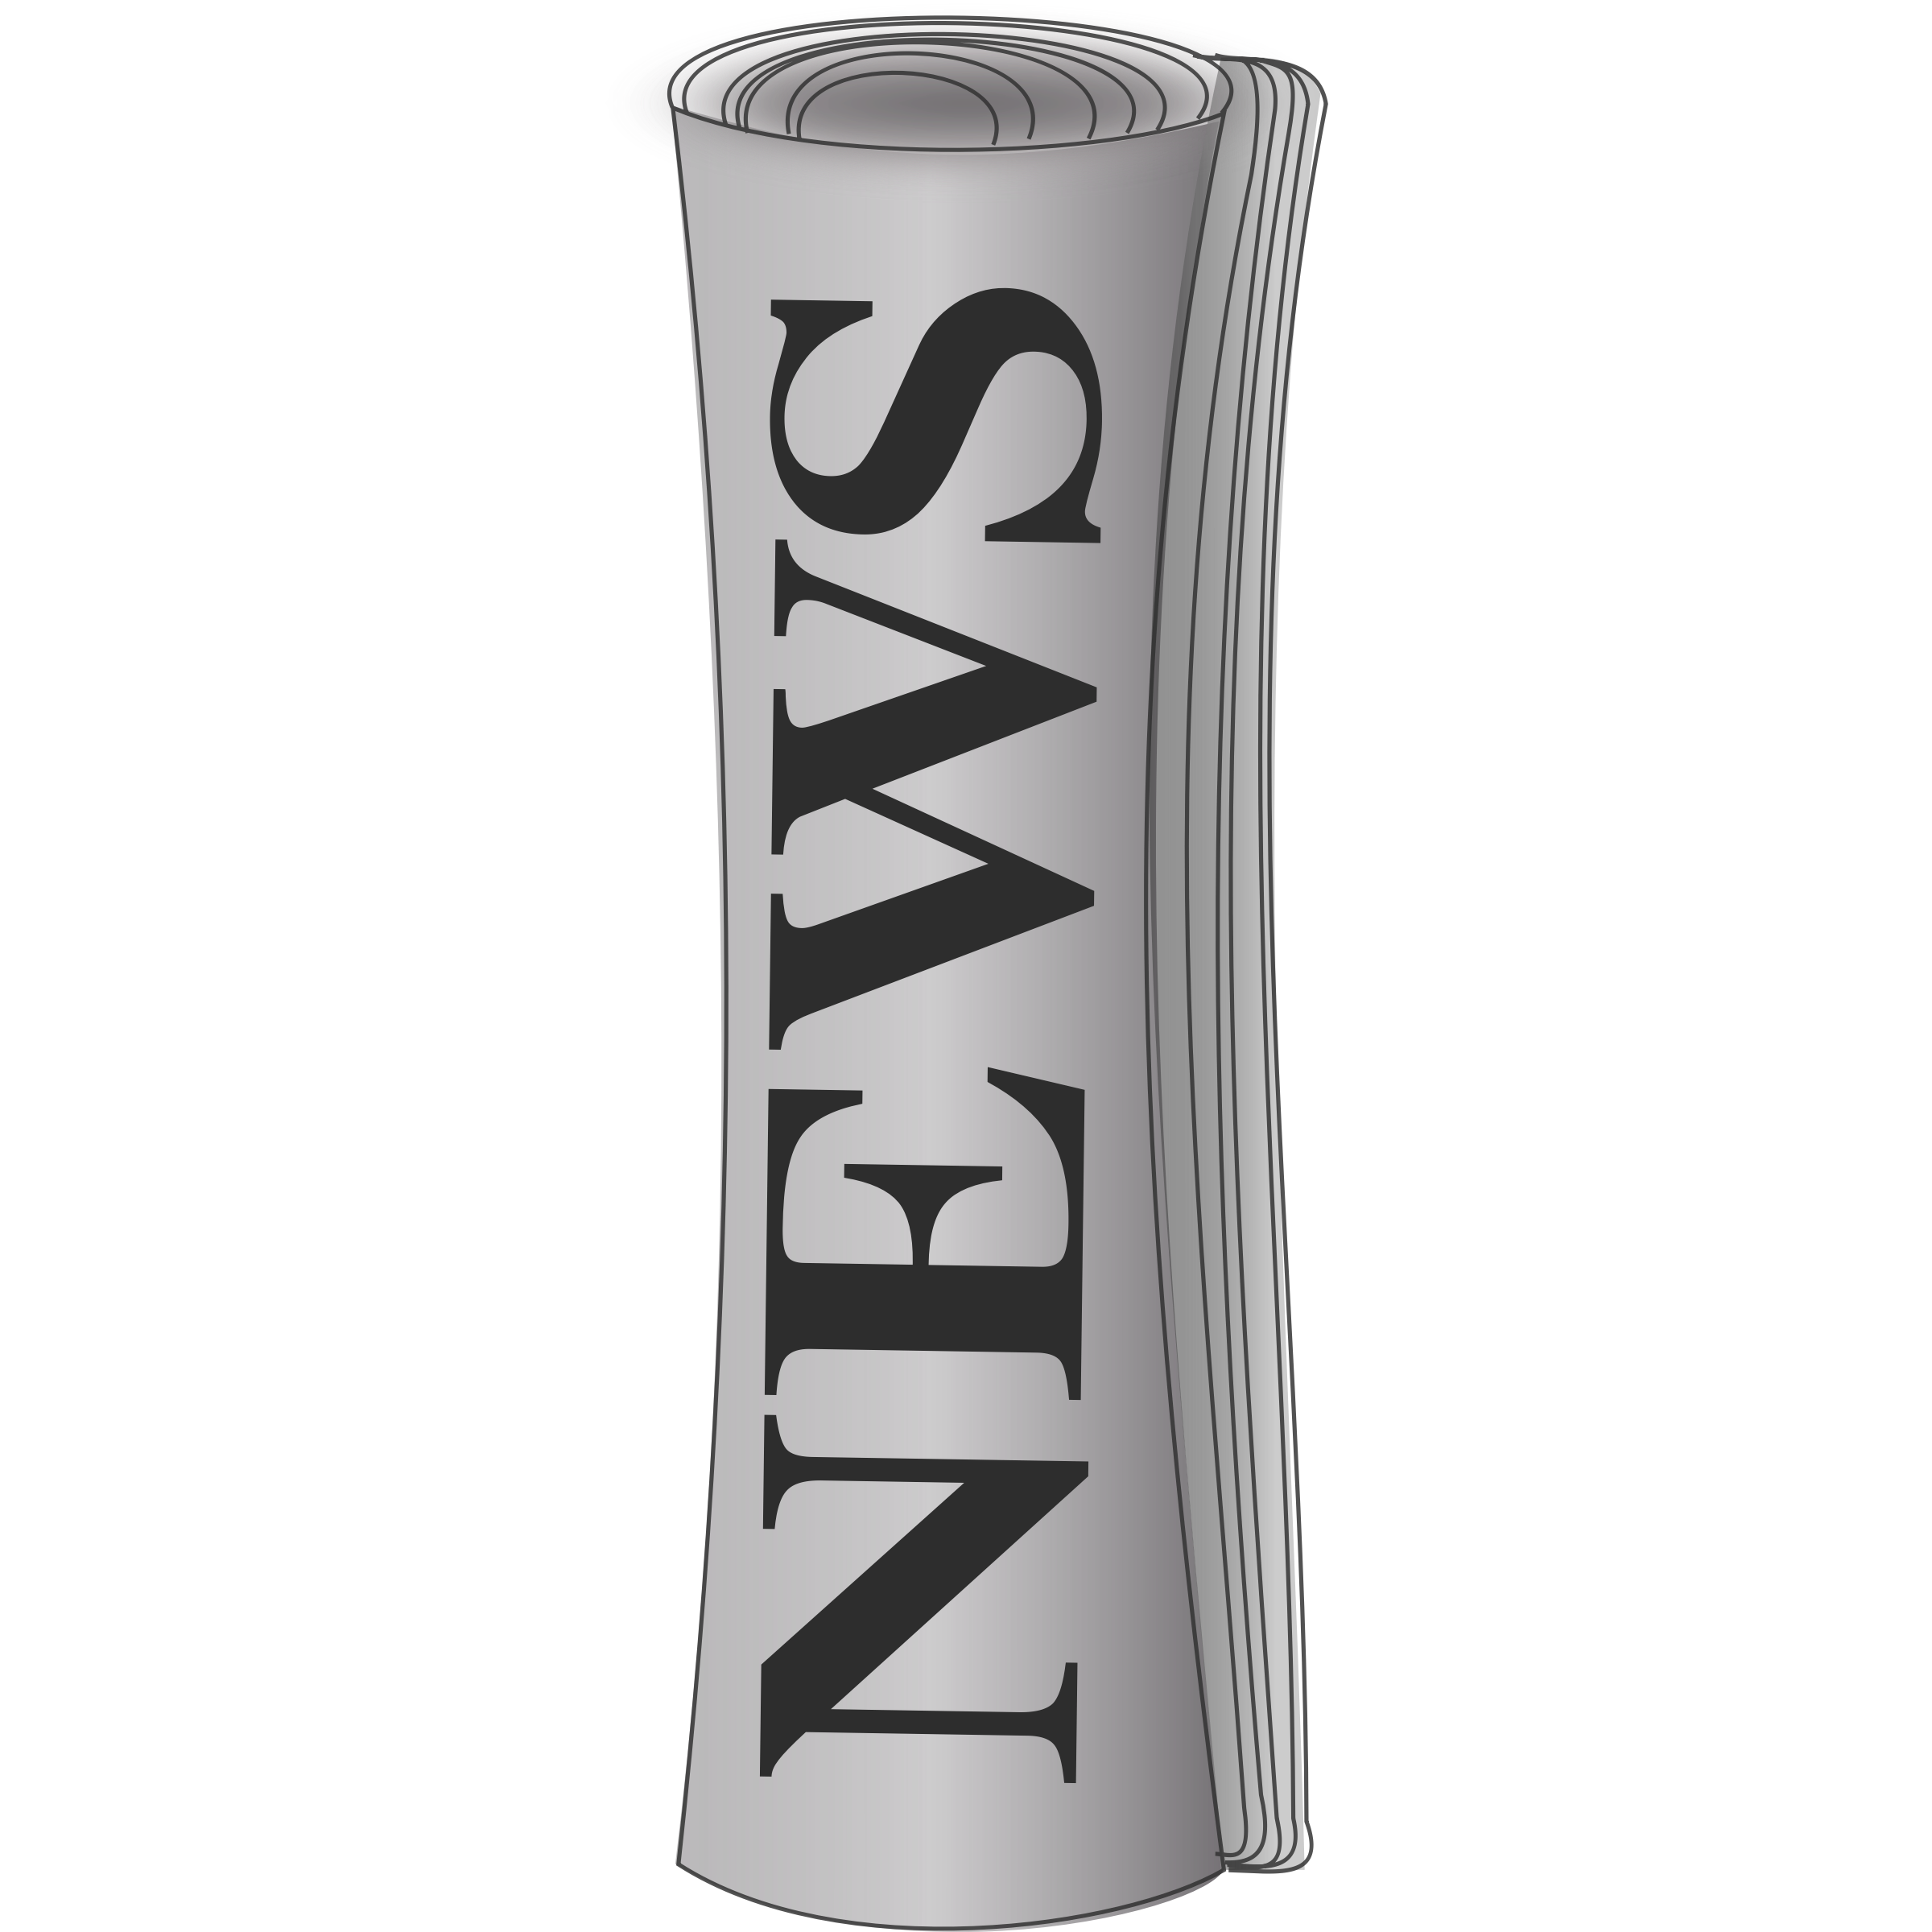 Newspaper clipart 3 image